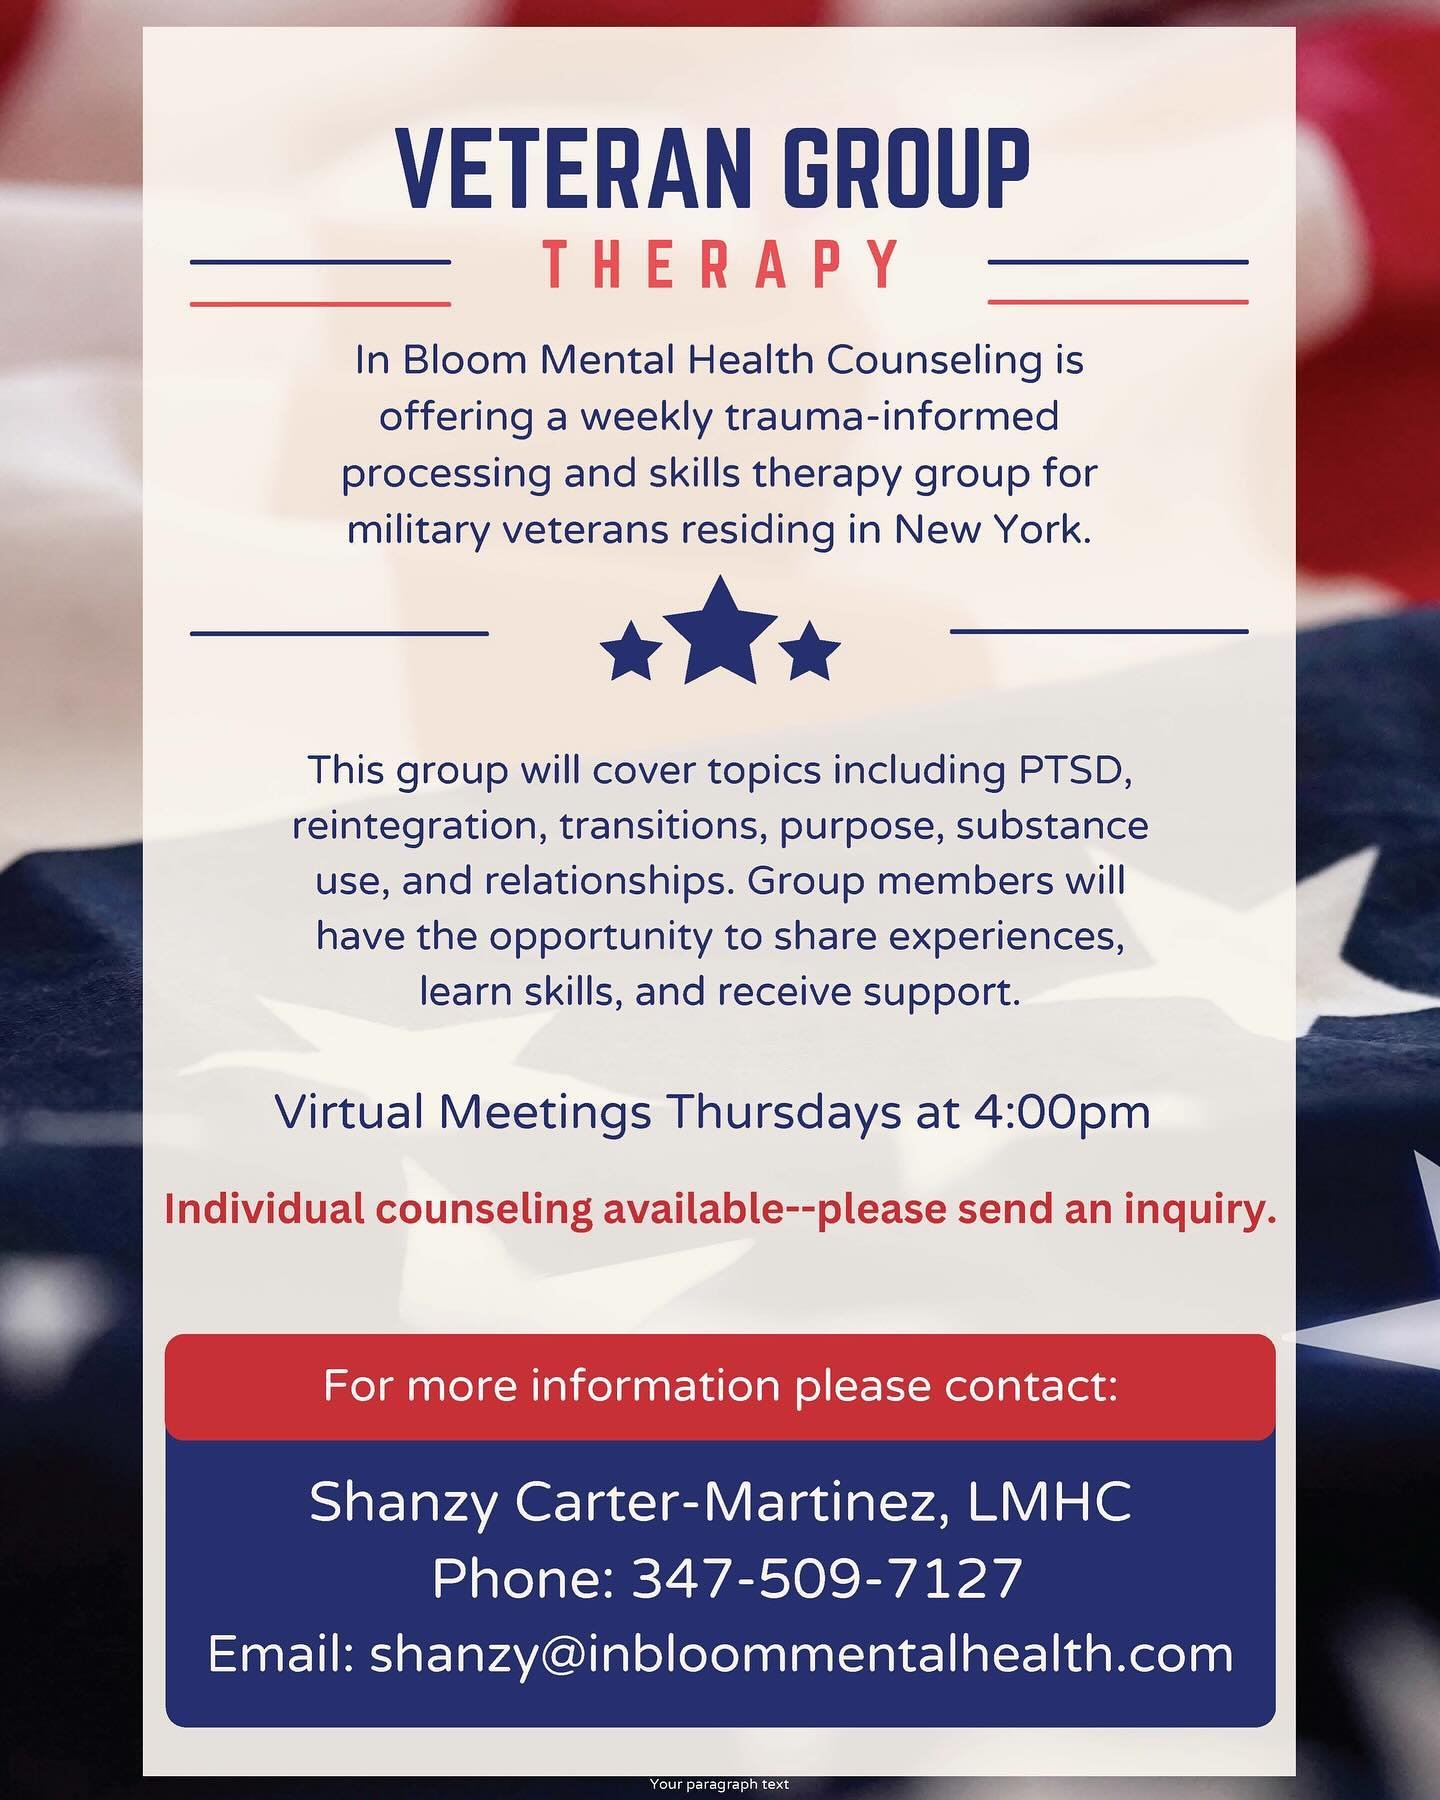 Are you a military veteran living in NY and needing support with PTSD, reintegrating, relationships or substance use? In Bloom Menral Health Counseling now offers a weekly virtual support  group. 

Rate $40/session

Email shanzy@inbloommentalhealth.c